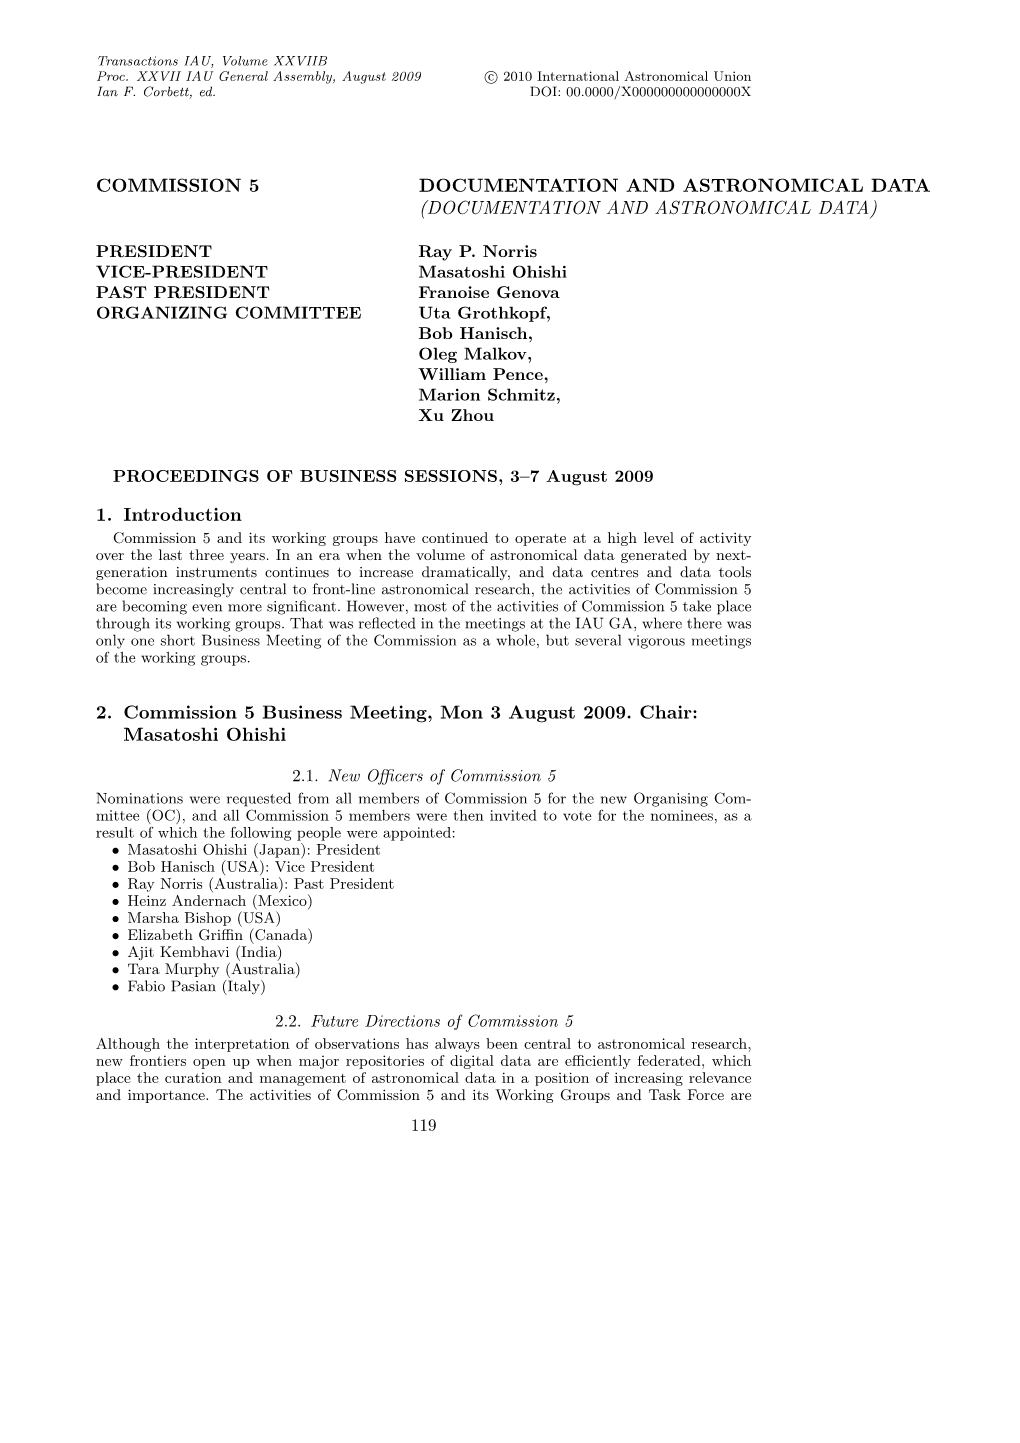 Commission 5 Documentation and Astronomical Data (Documentation and Astronomical Data)